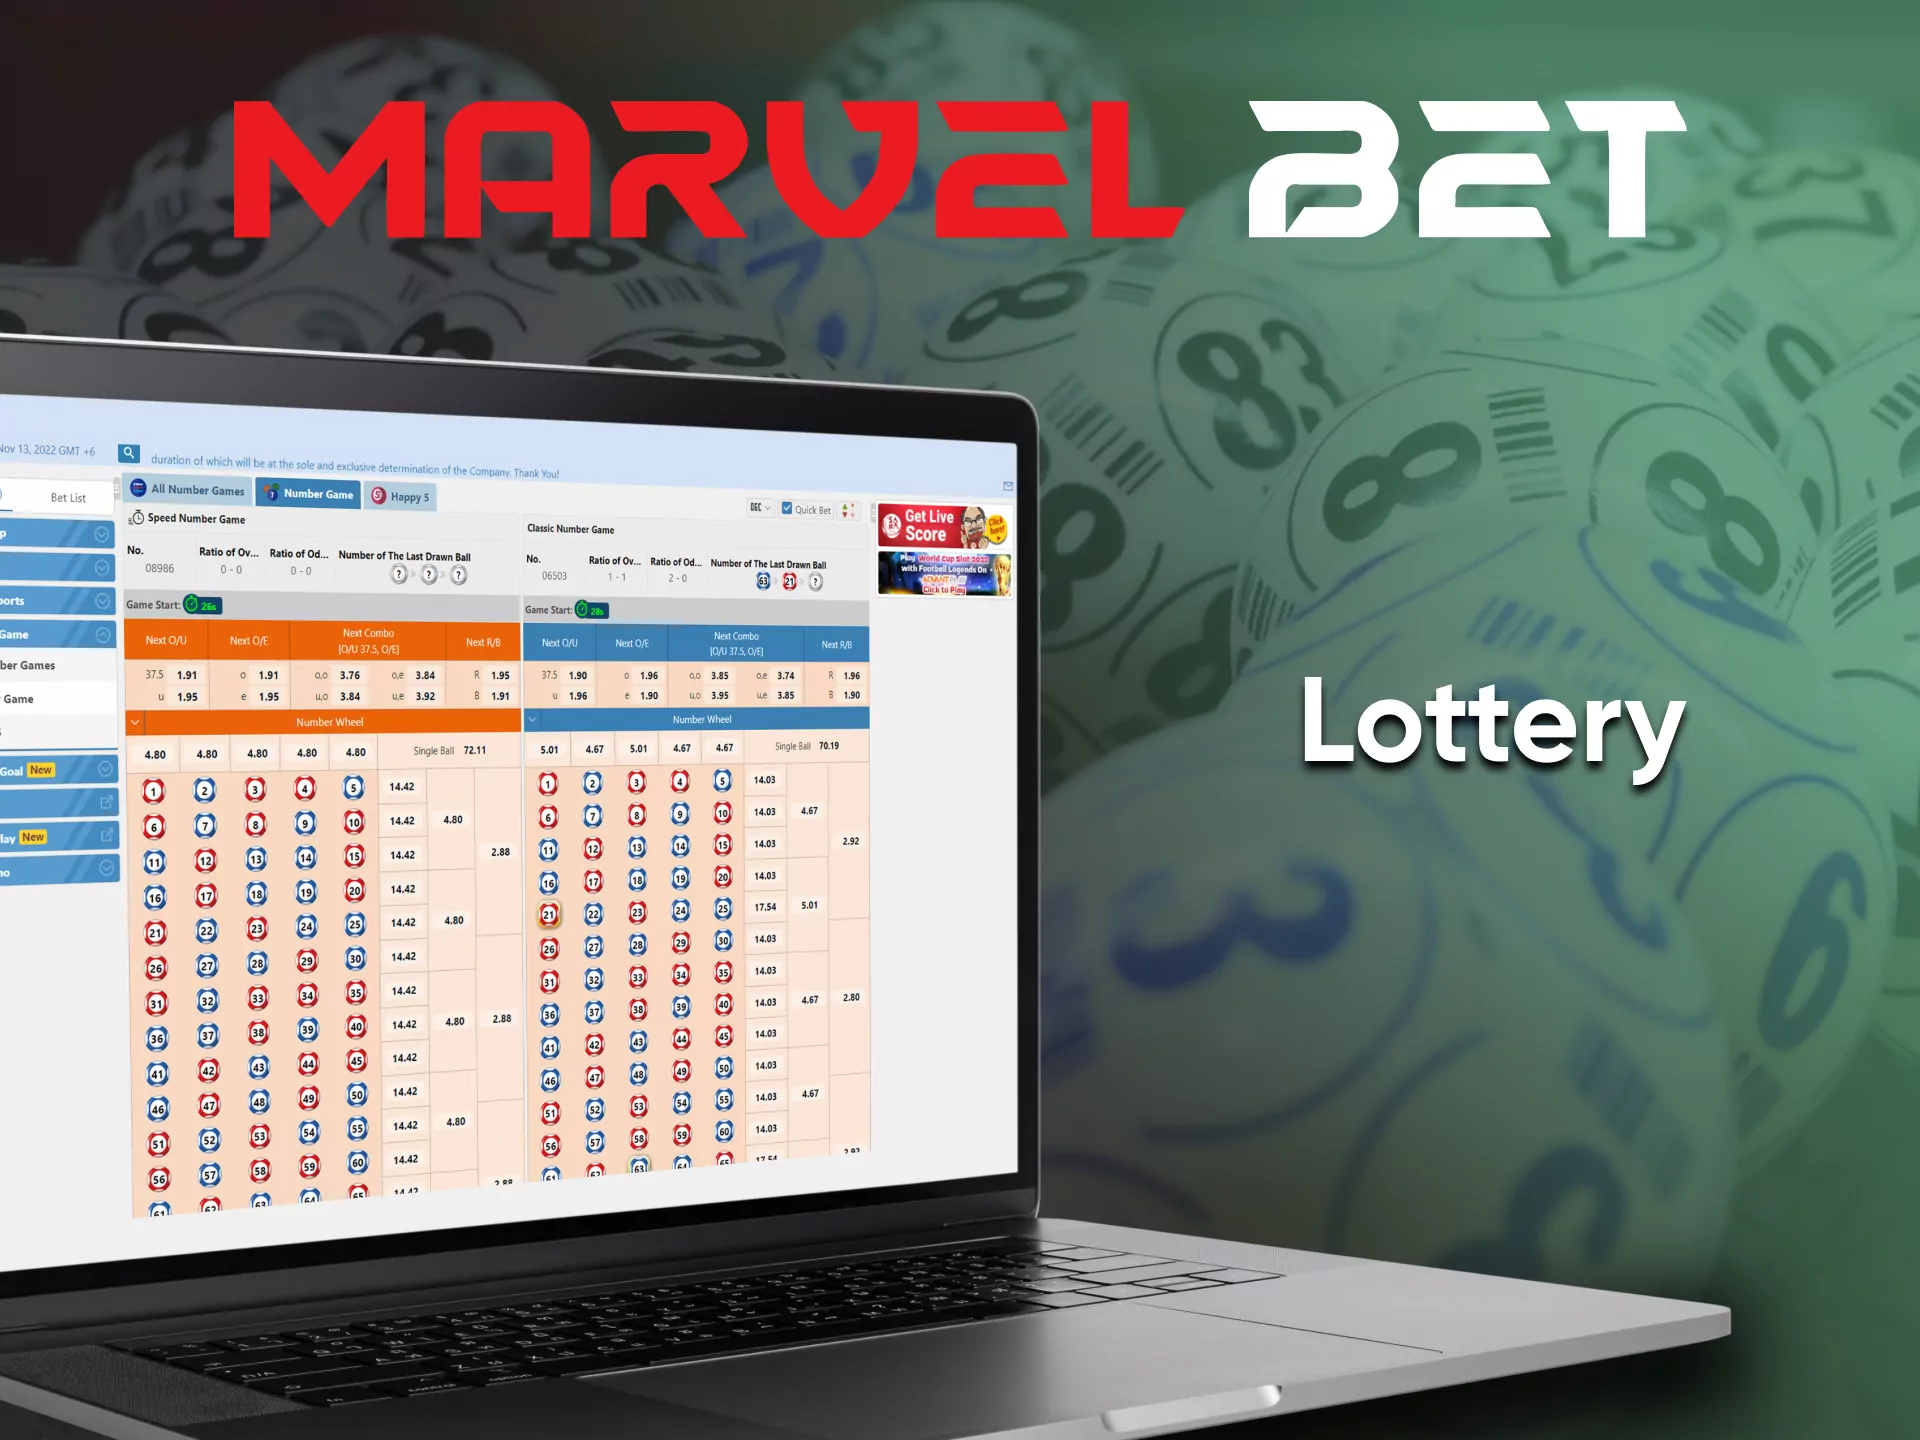 You can buy lottery tickets on Marvelet.